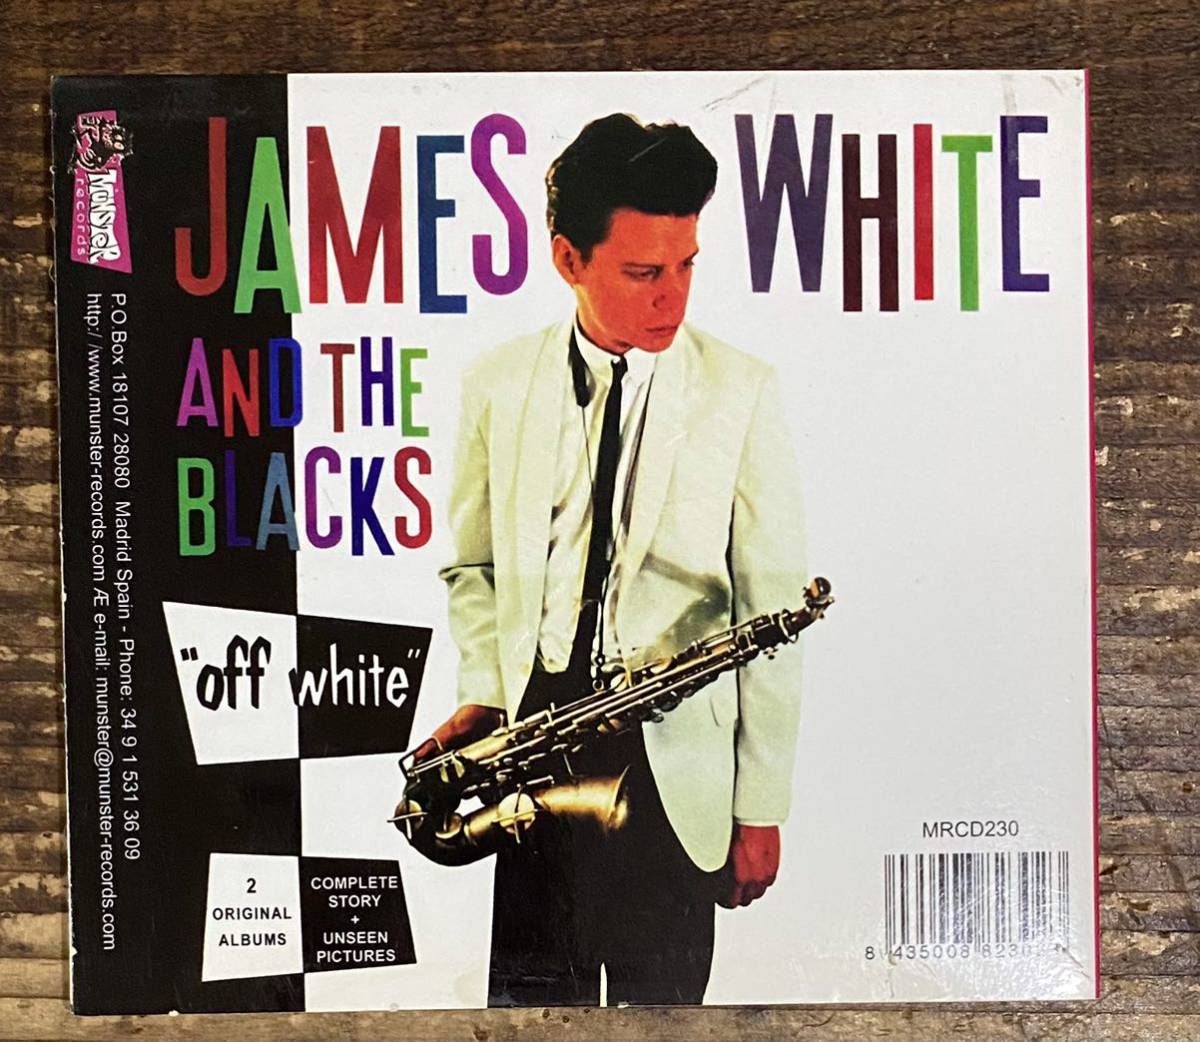 CD 4枚セット】JAMES WHITE CHANCE ジェームス・ホワイト■NO NEW YORK■BUY■CONTORTIONS■NO WAVE 名盤■検) D.N.A TEENAGE JESUS